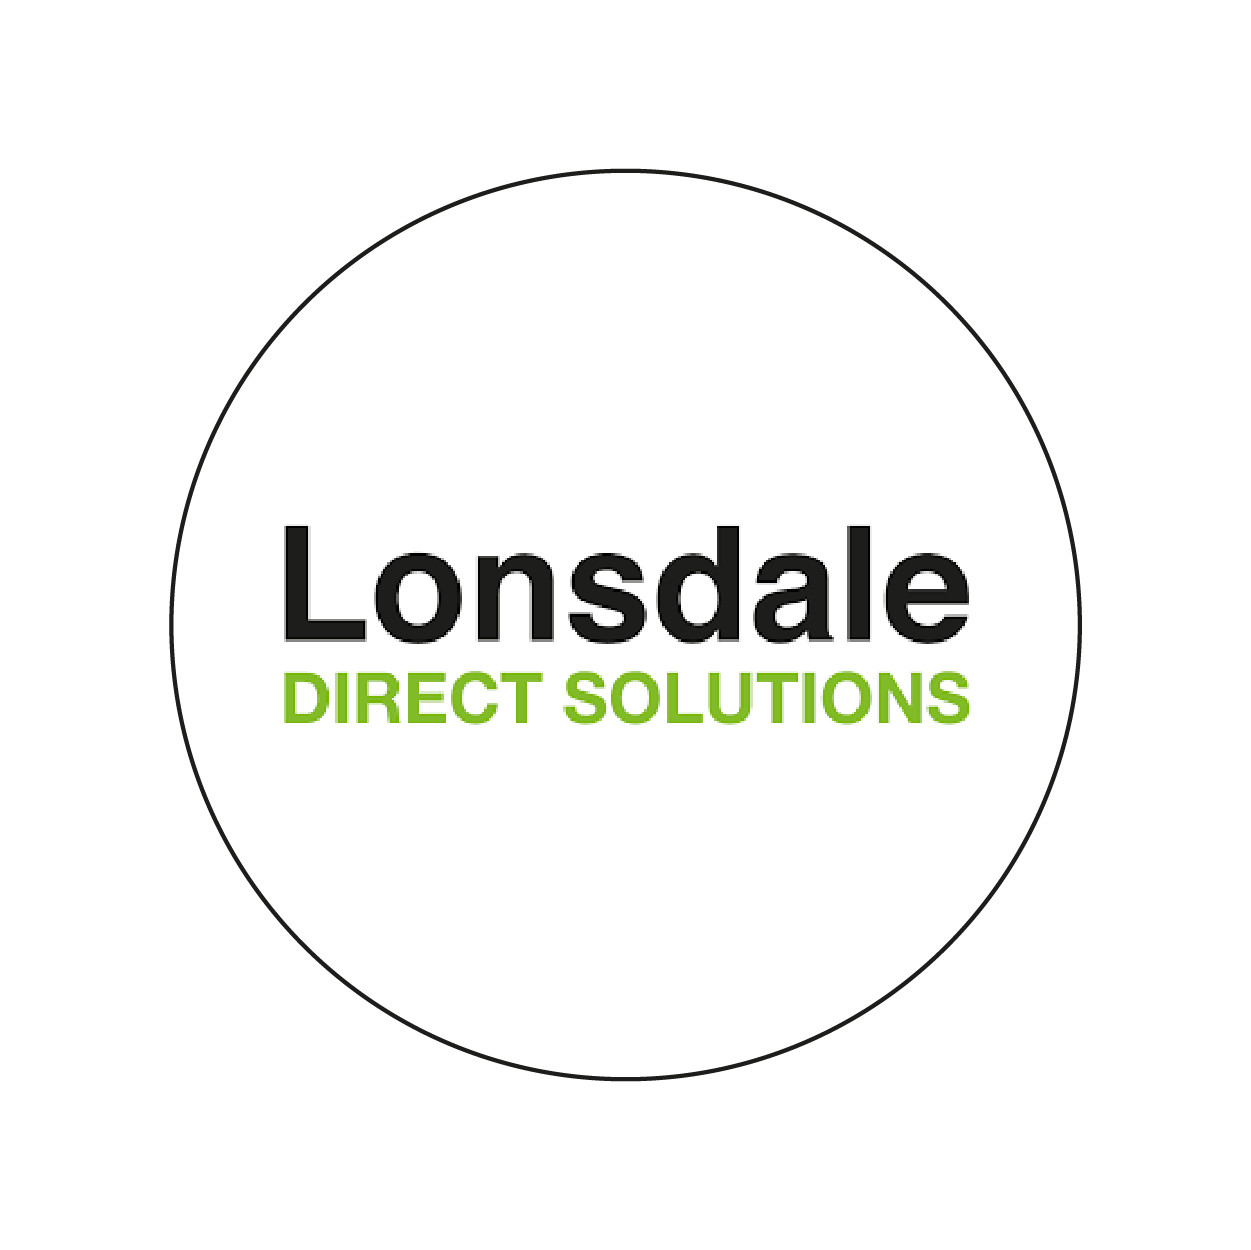 Lonsdale Direct